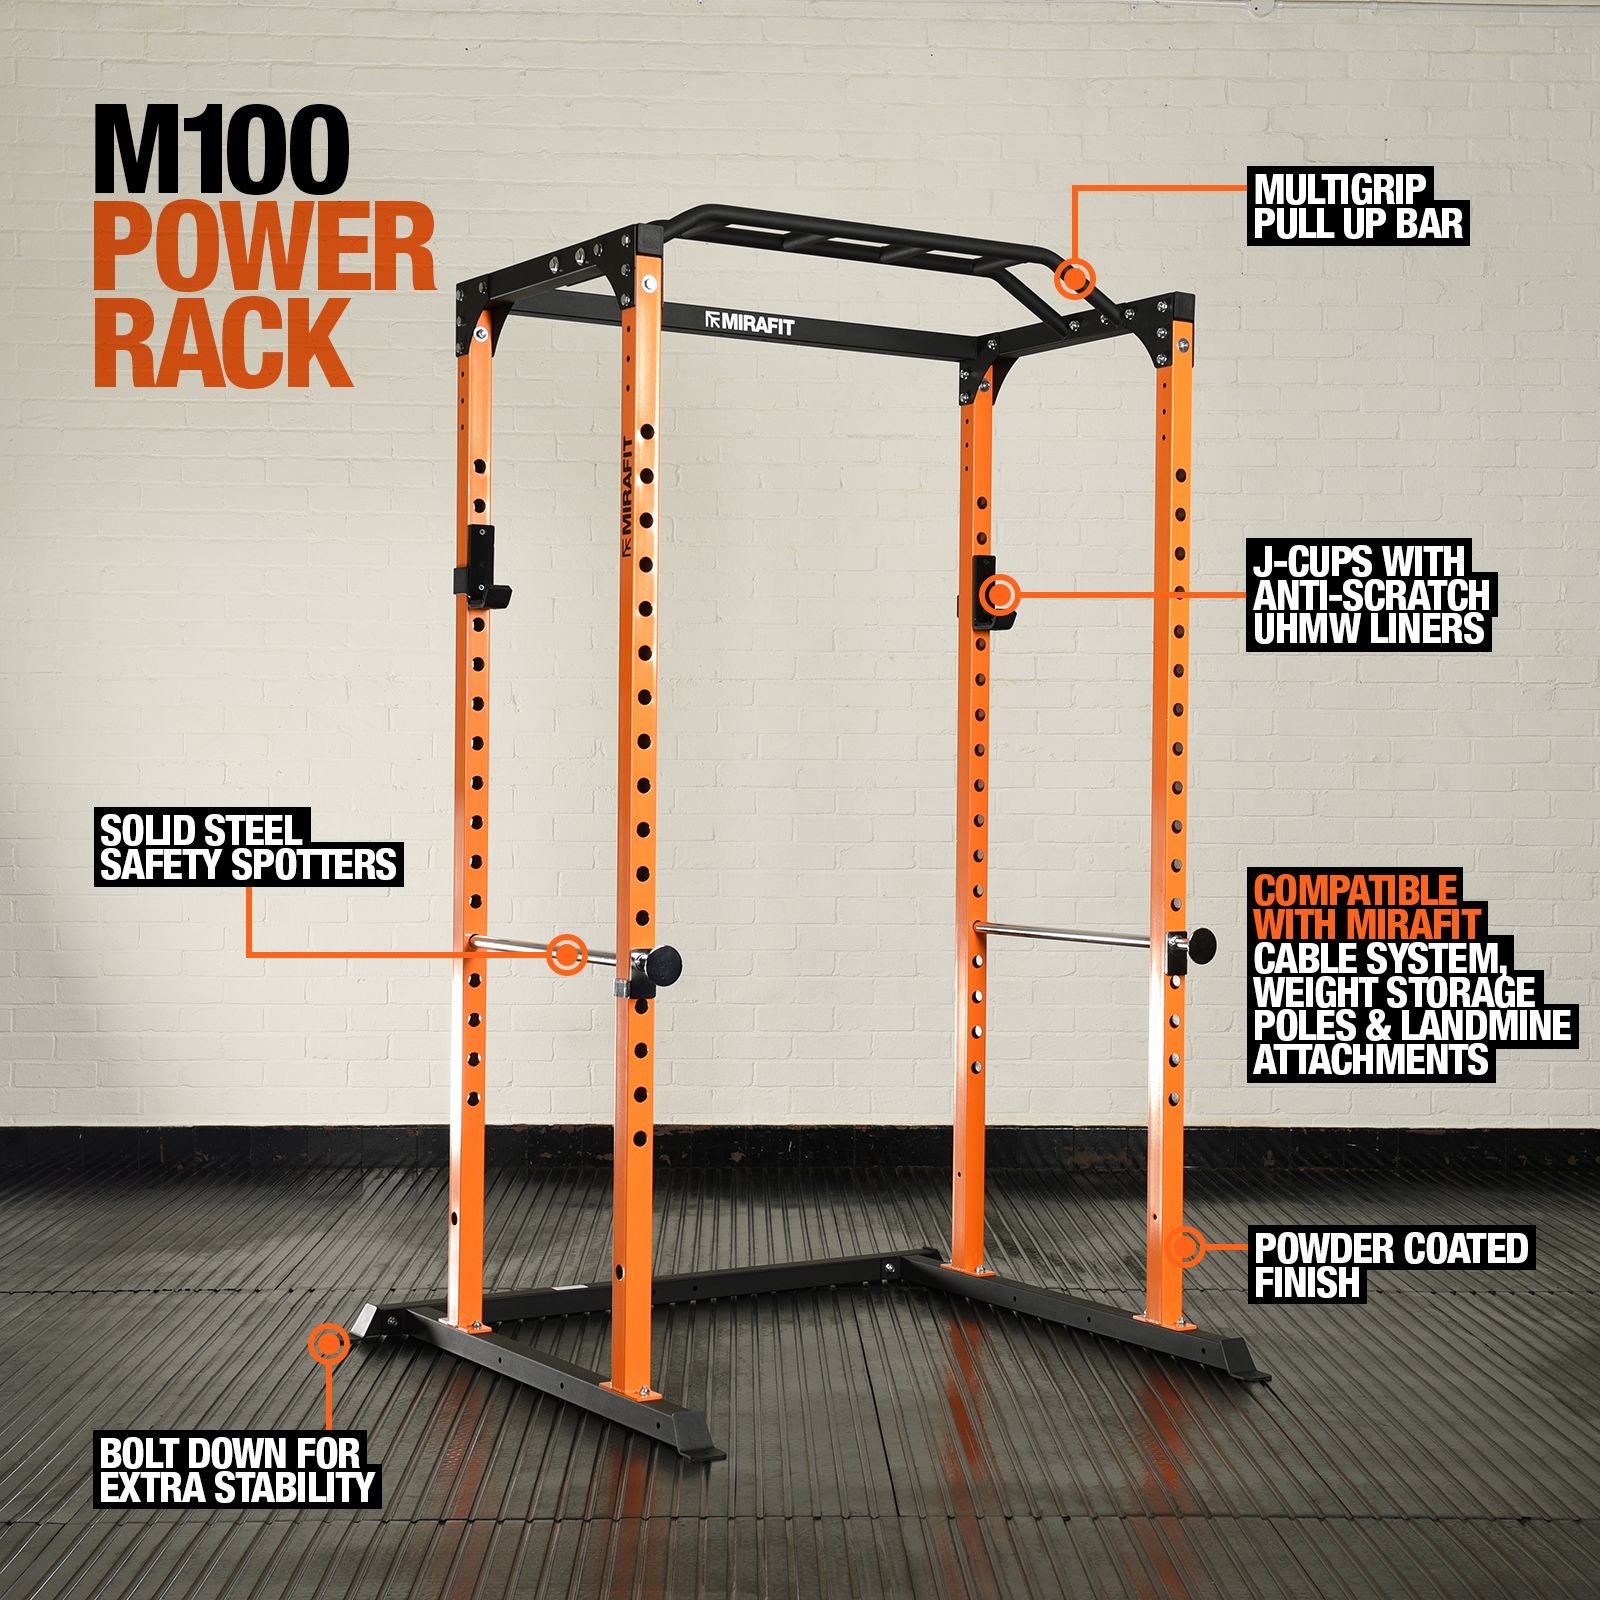 M100 Power Rack Review